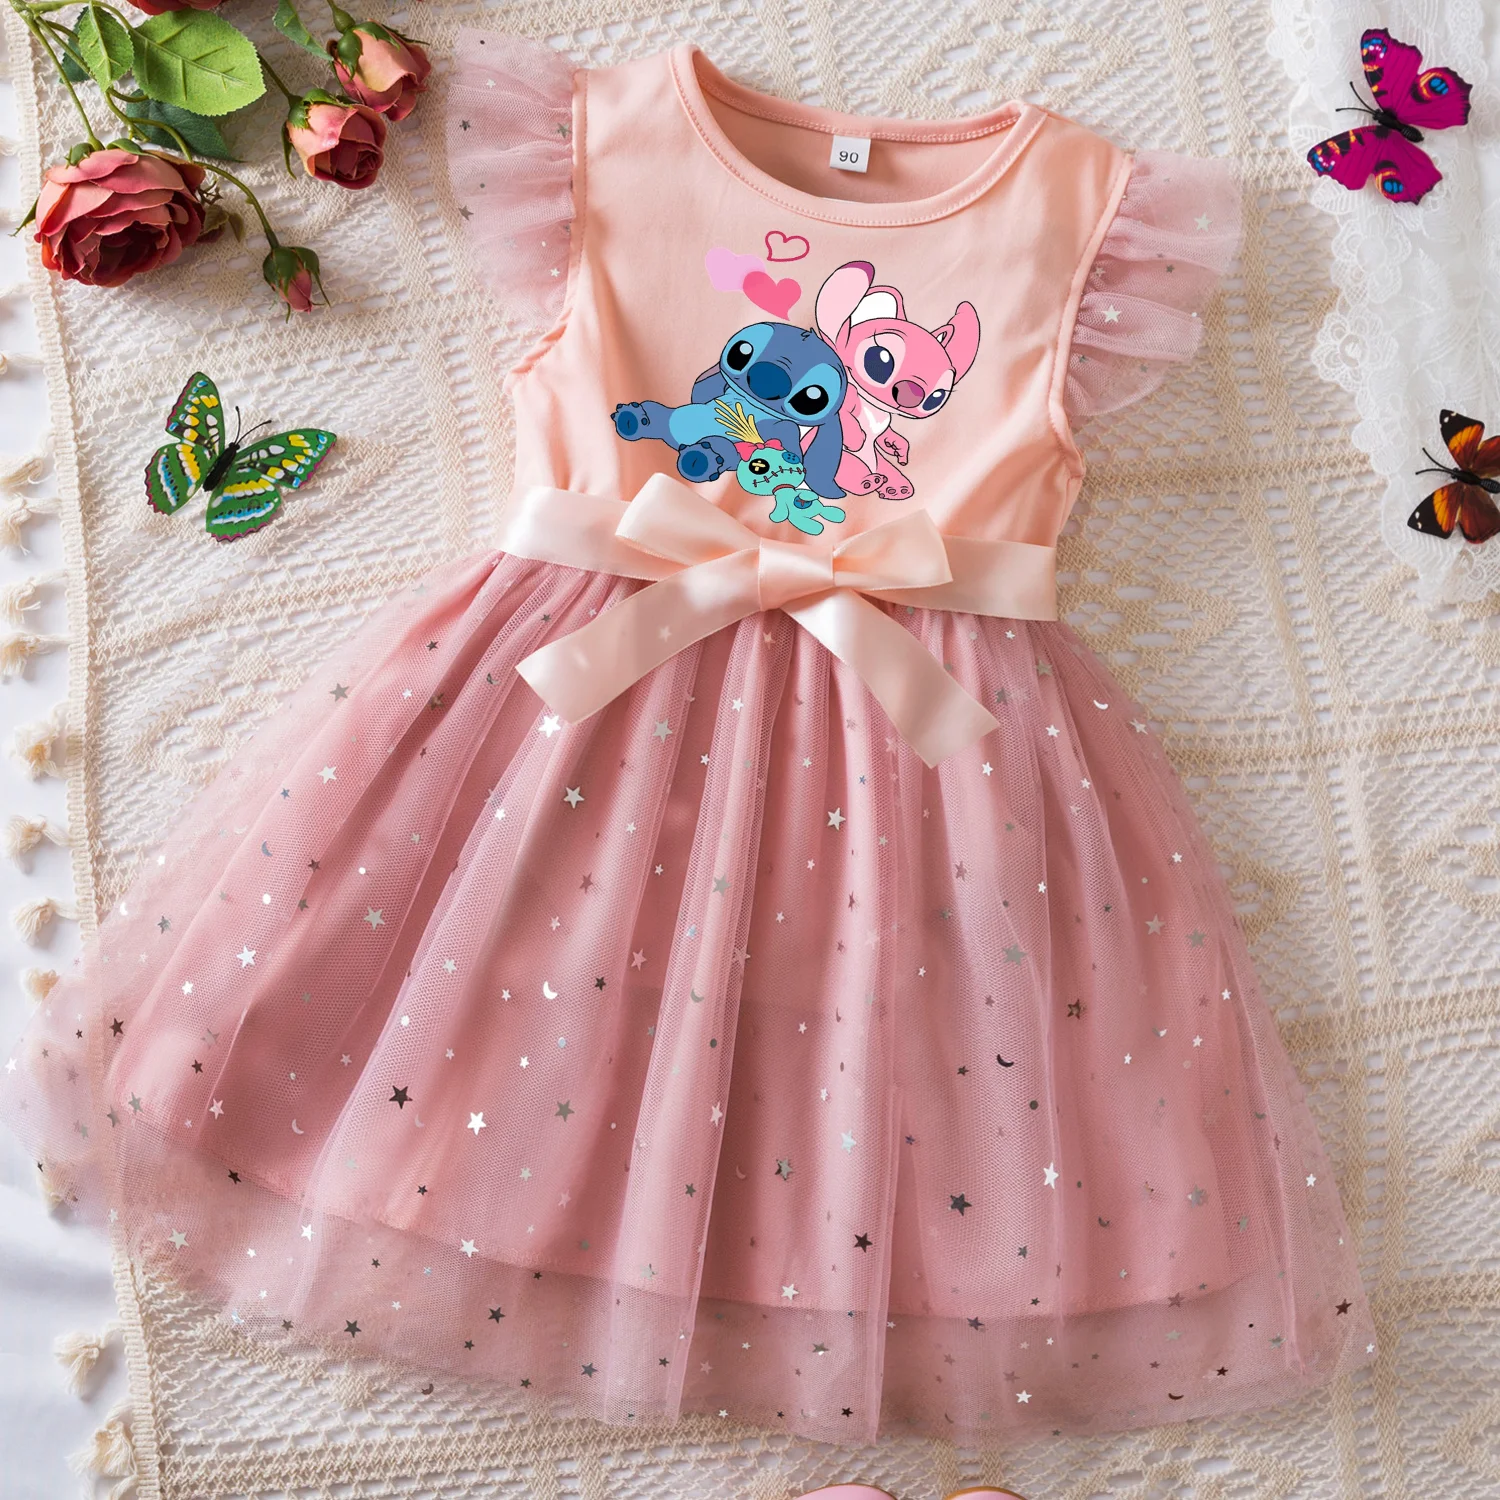 

Lilo Stitch Sweet Girls Summer Clothes Flying Sleeves Bow Sequin Dress 2-6Y Kid Birthday Tutu Princess Dress for Baby Girl